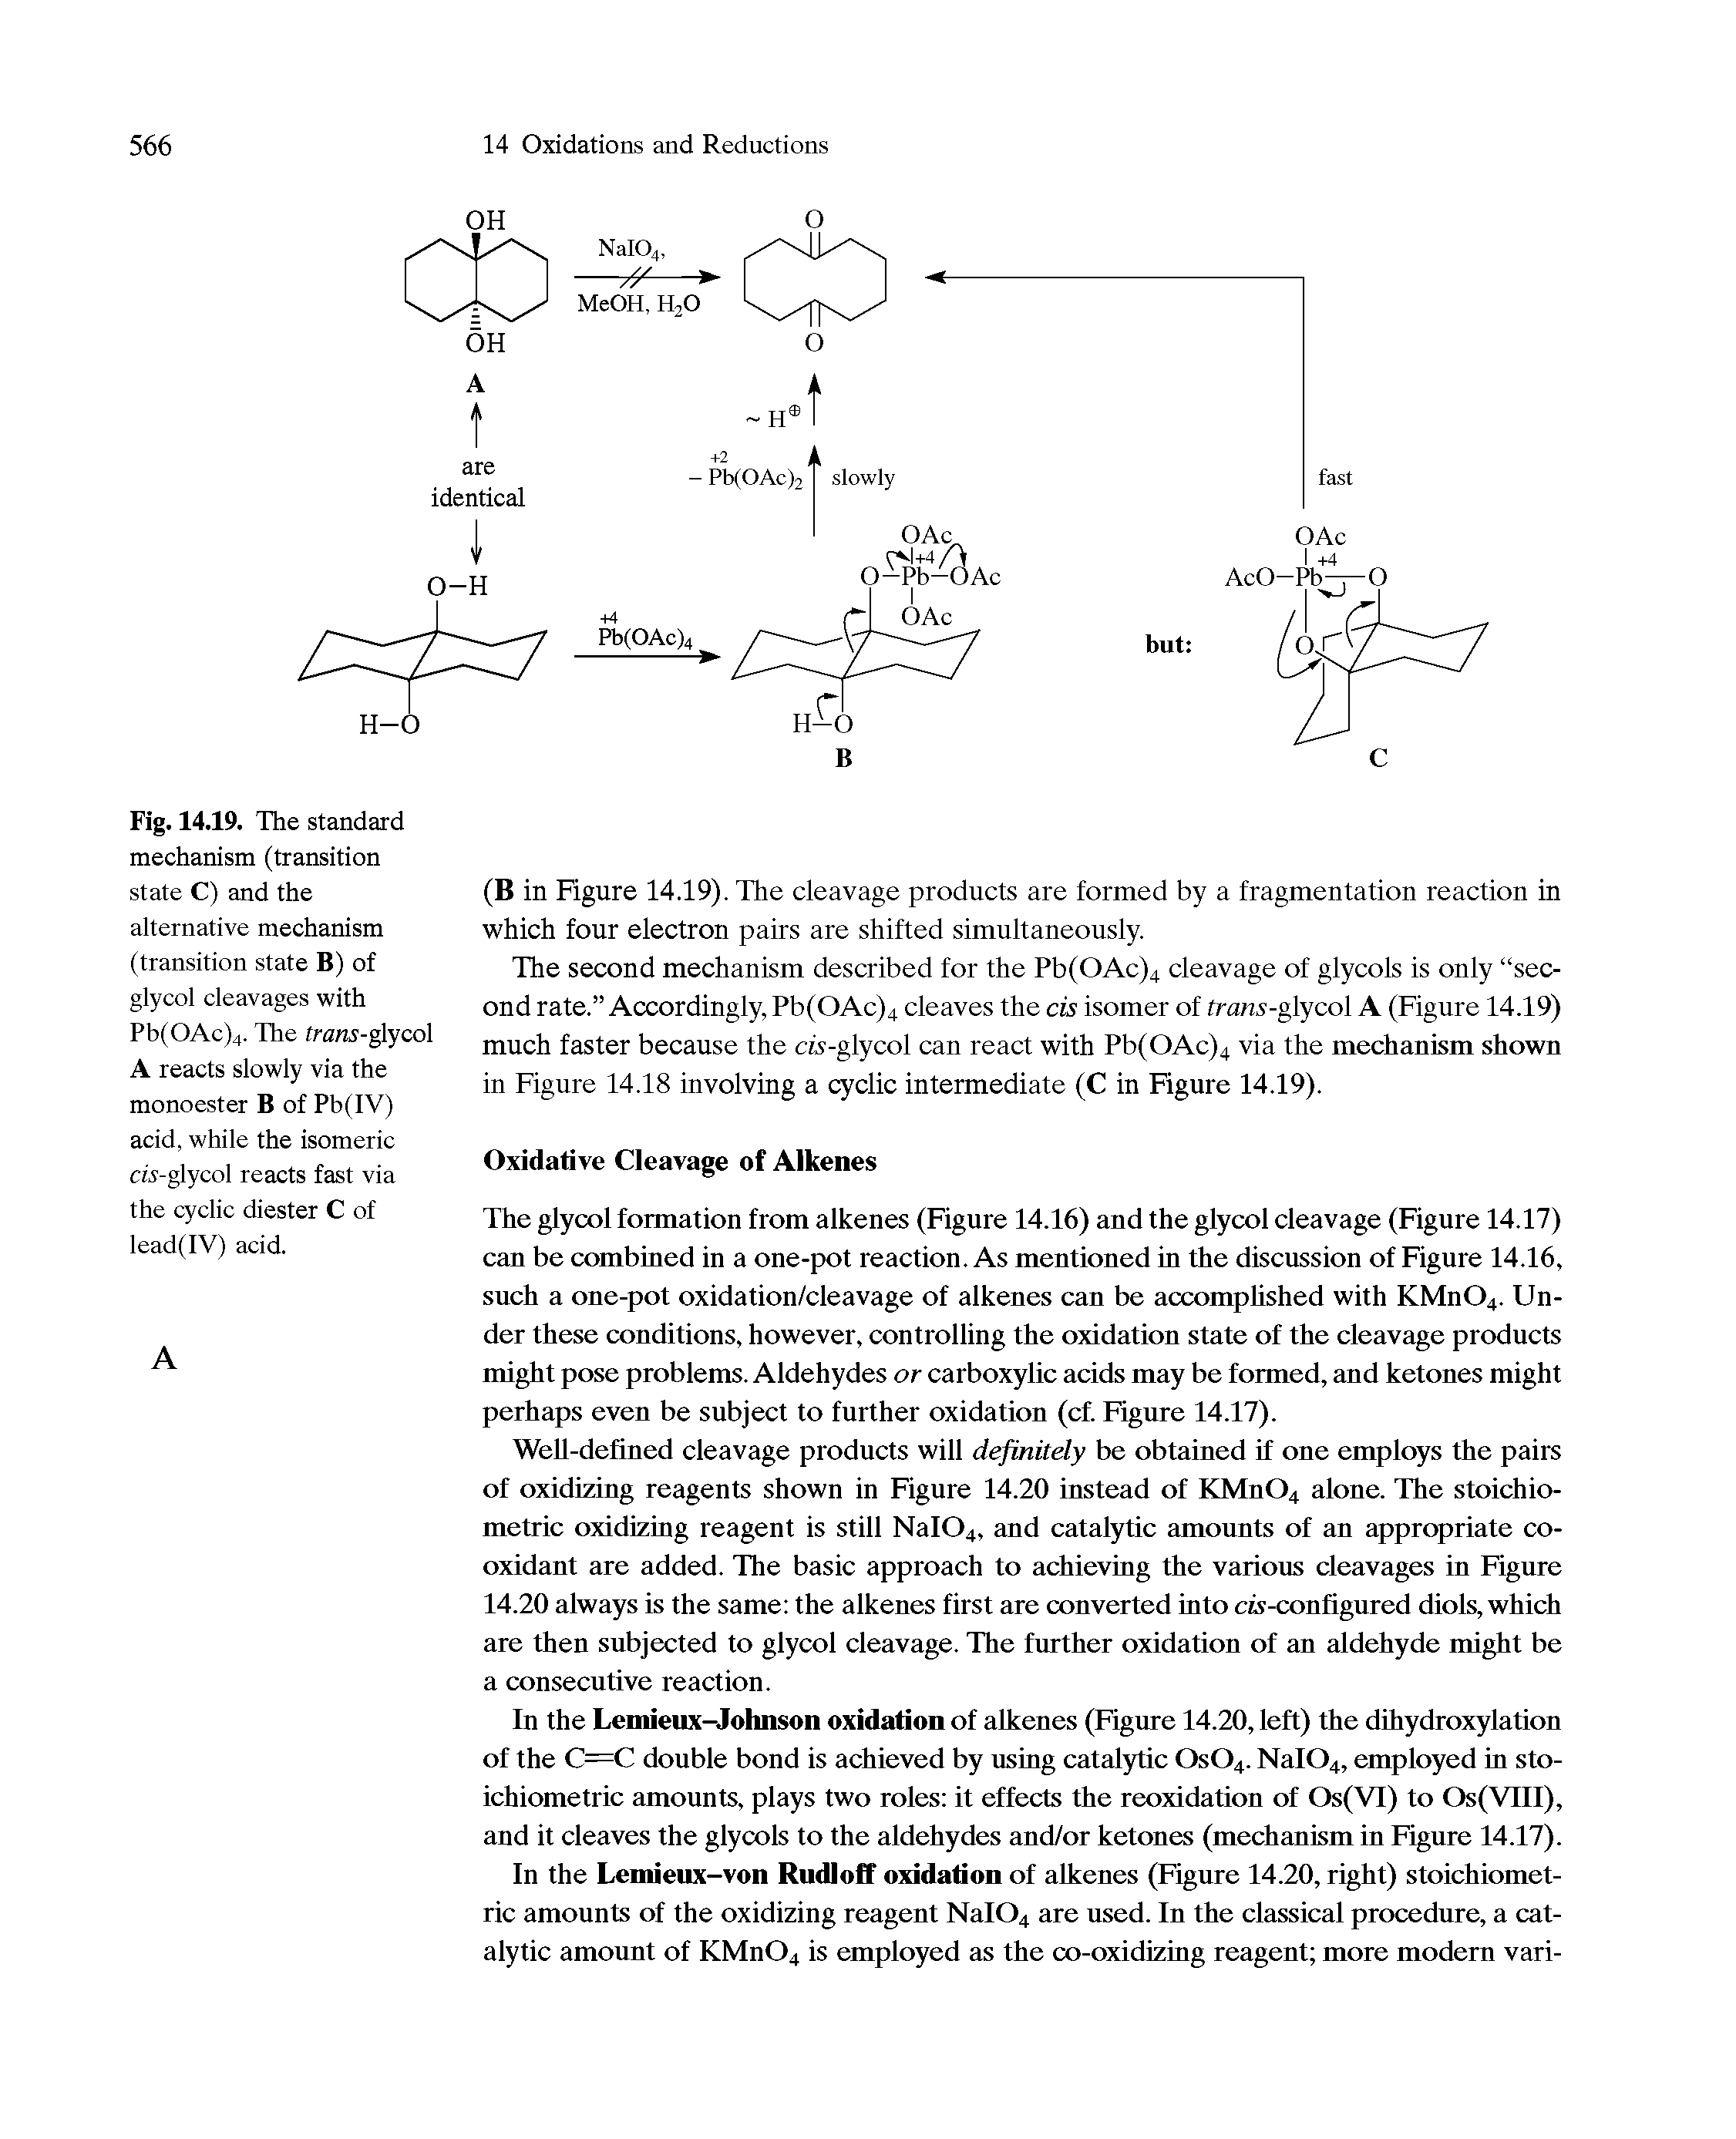 Fig. 14.19. The standard mechanism (transition state C) and the alternative mechanism (transition state B) of glycol cleavages with Pb(OAc)4. The trans-glycol A reacts slowly via the monoester B of Pb(IV) acid, while the isomeric di-glycol reacts fast via the cyclic diester C of lead(IV) acid.